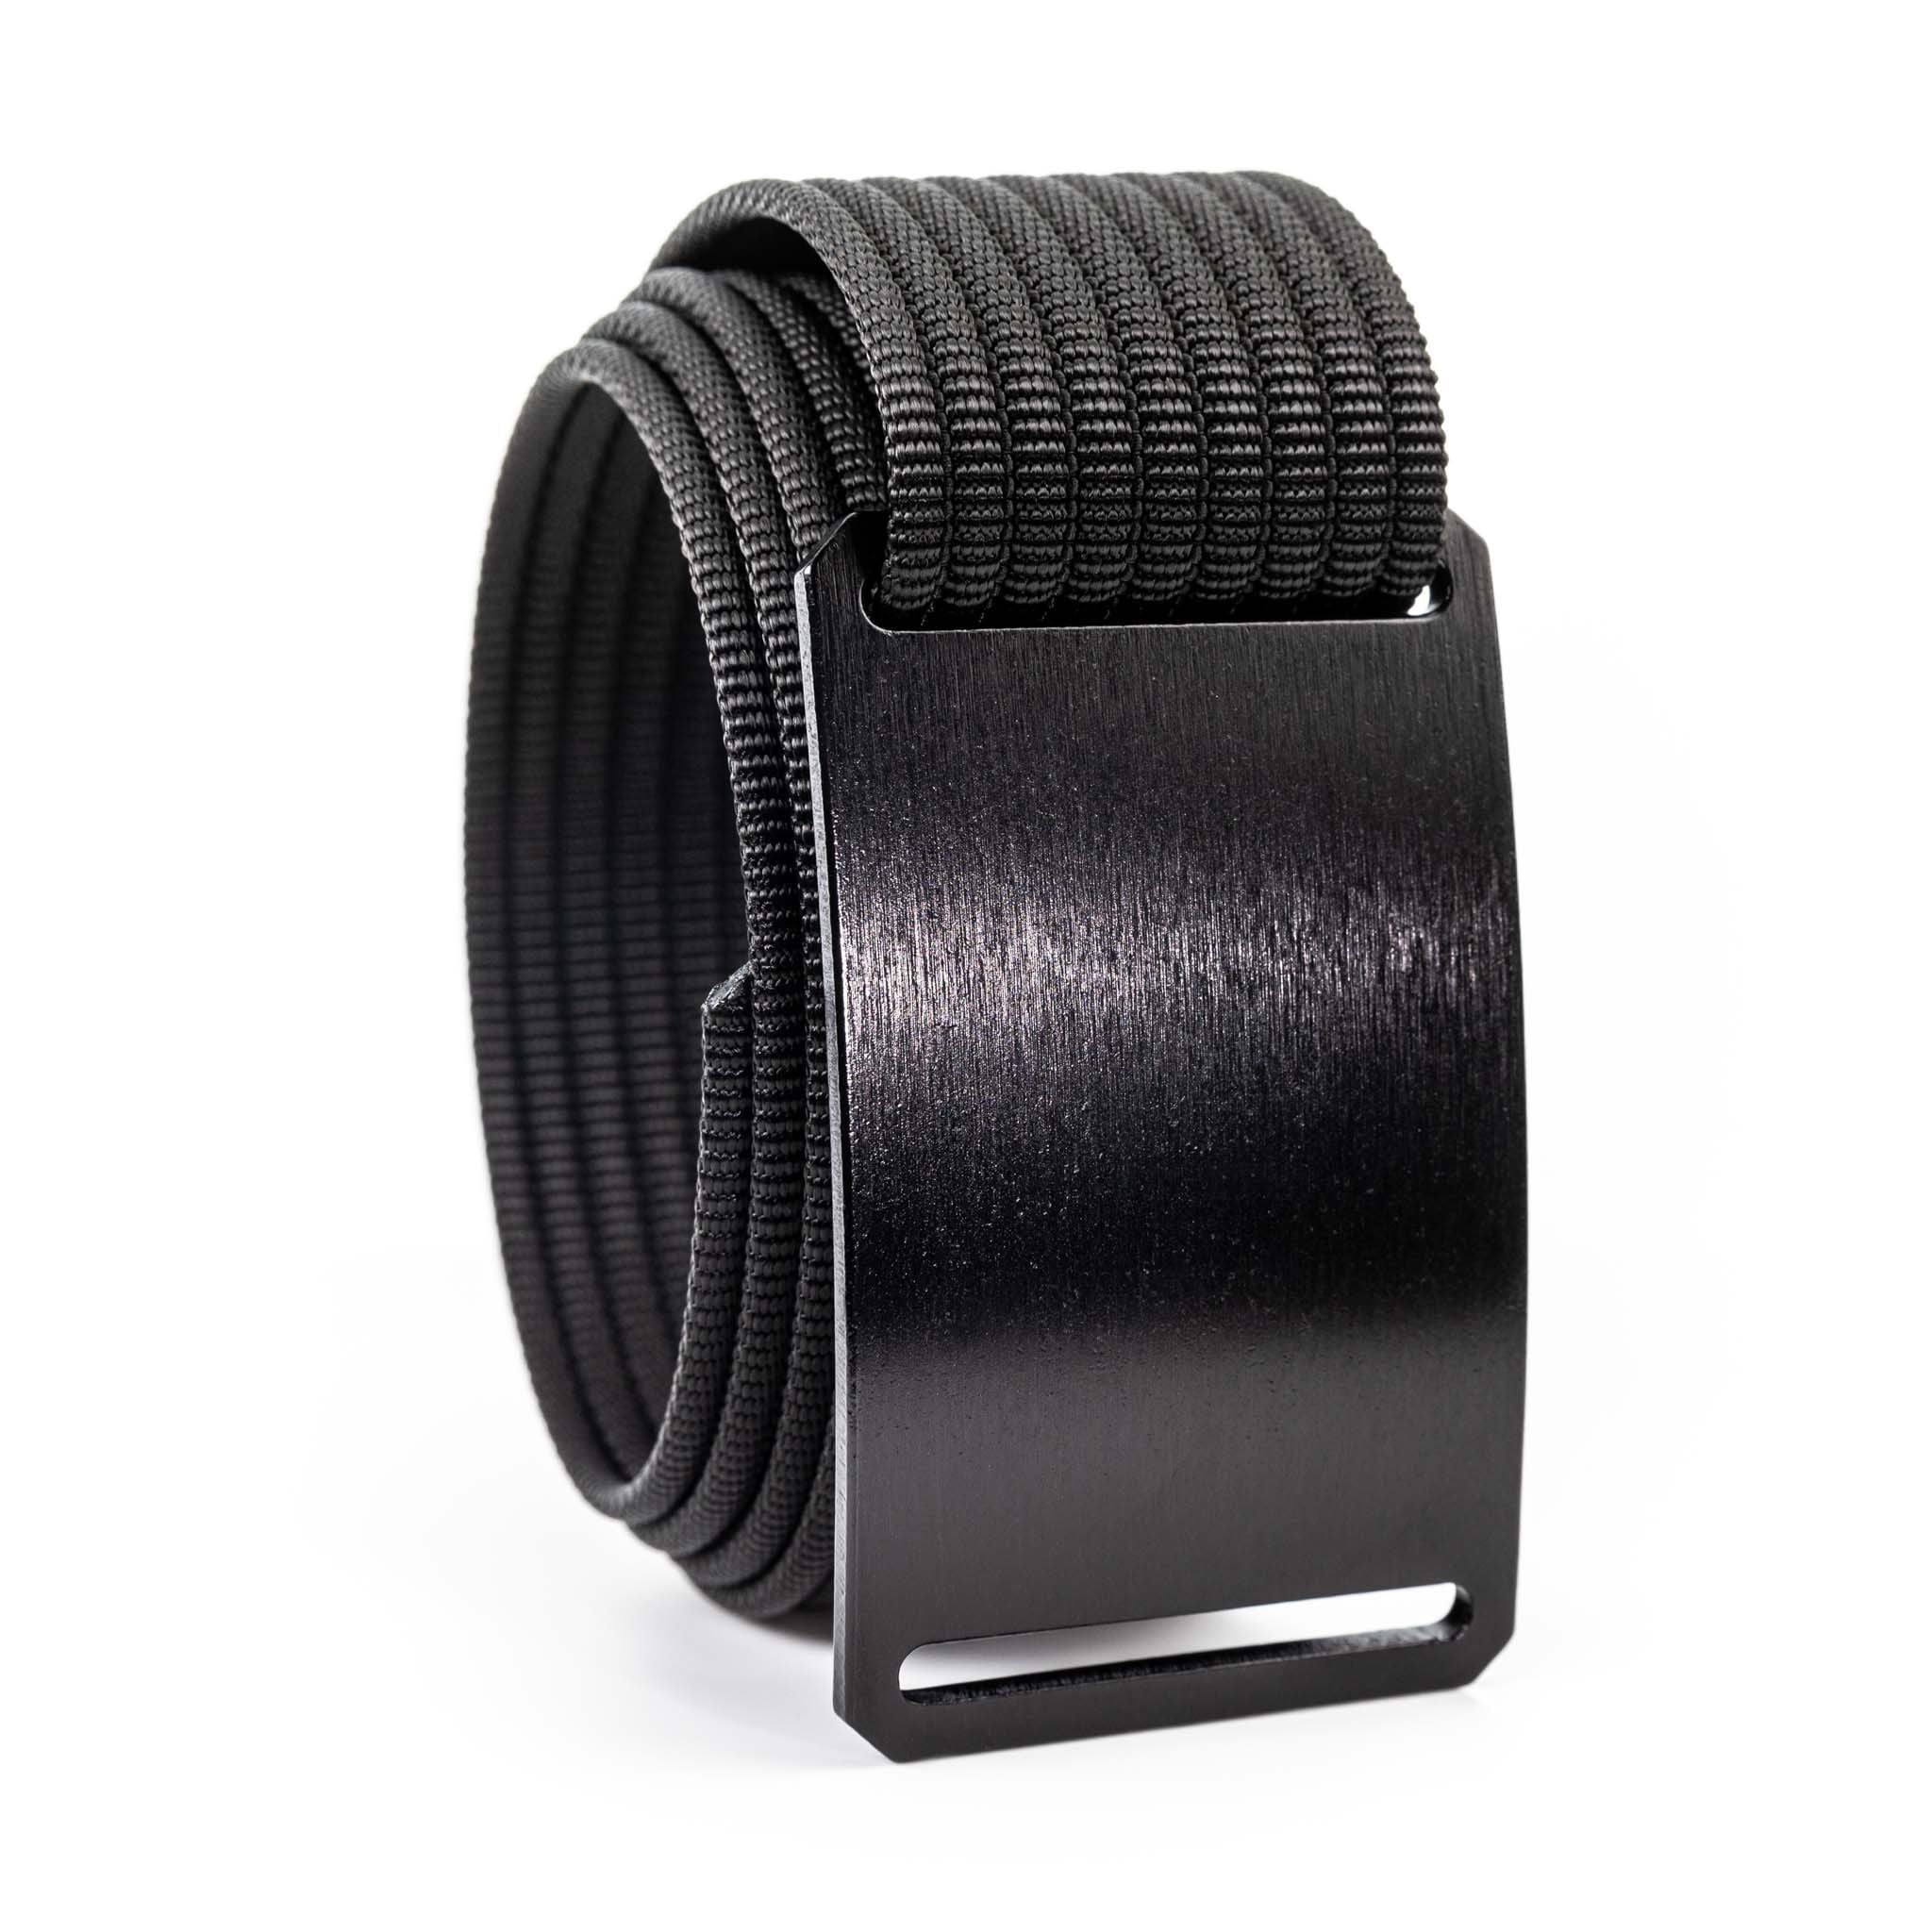 Grip 6 belt rolls up small and is easy to pack.